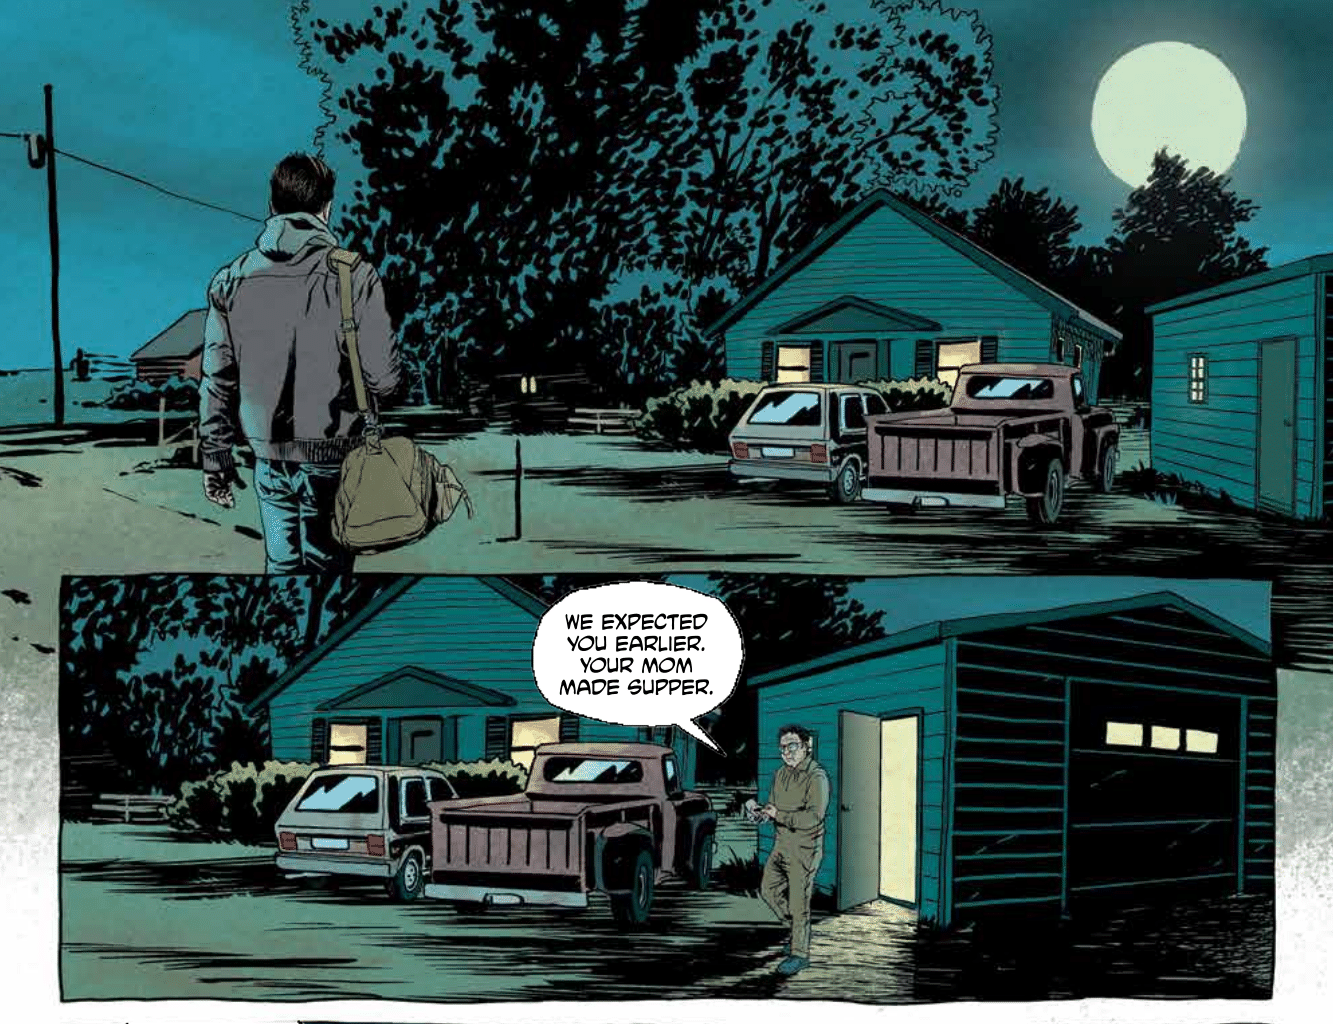 A comic book page showing a character returning to his small Wisconsin home, where his father says his mother made supper